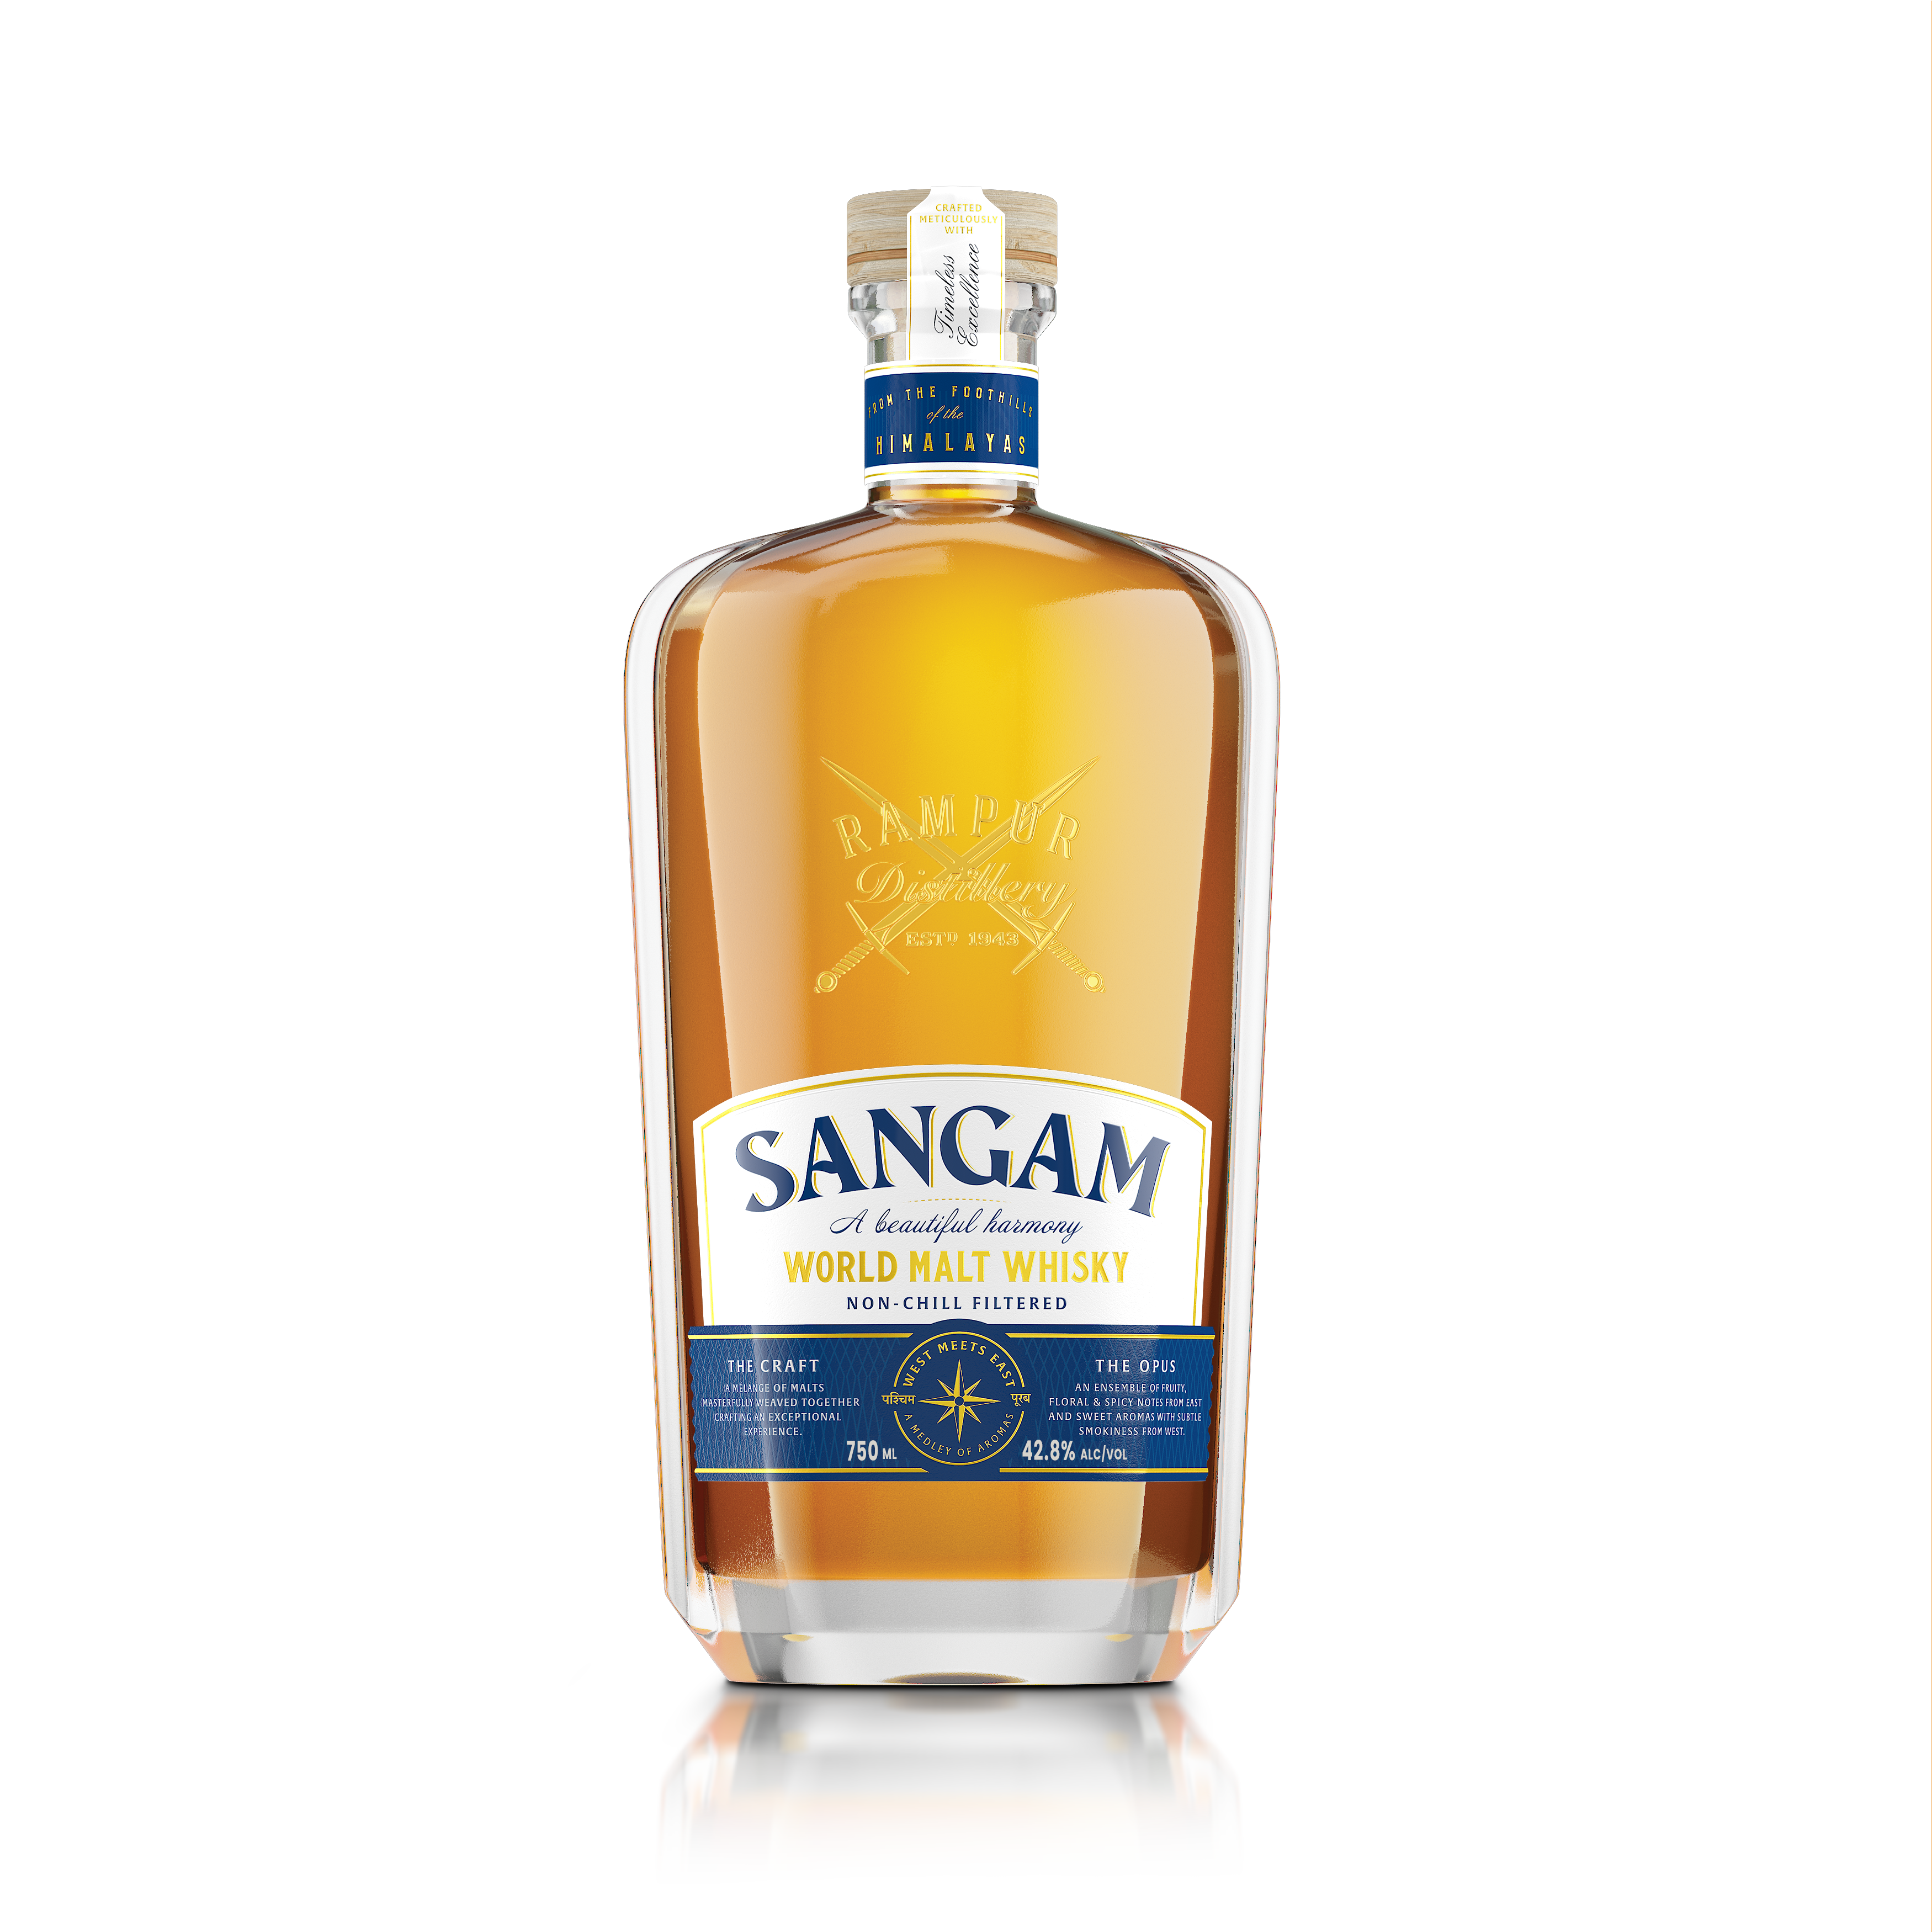 Rampur Distillery’s Sangam World Malt Whisky makes its entry to the Indian shores